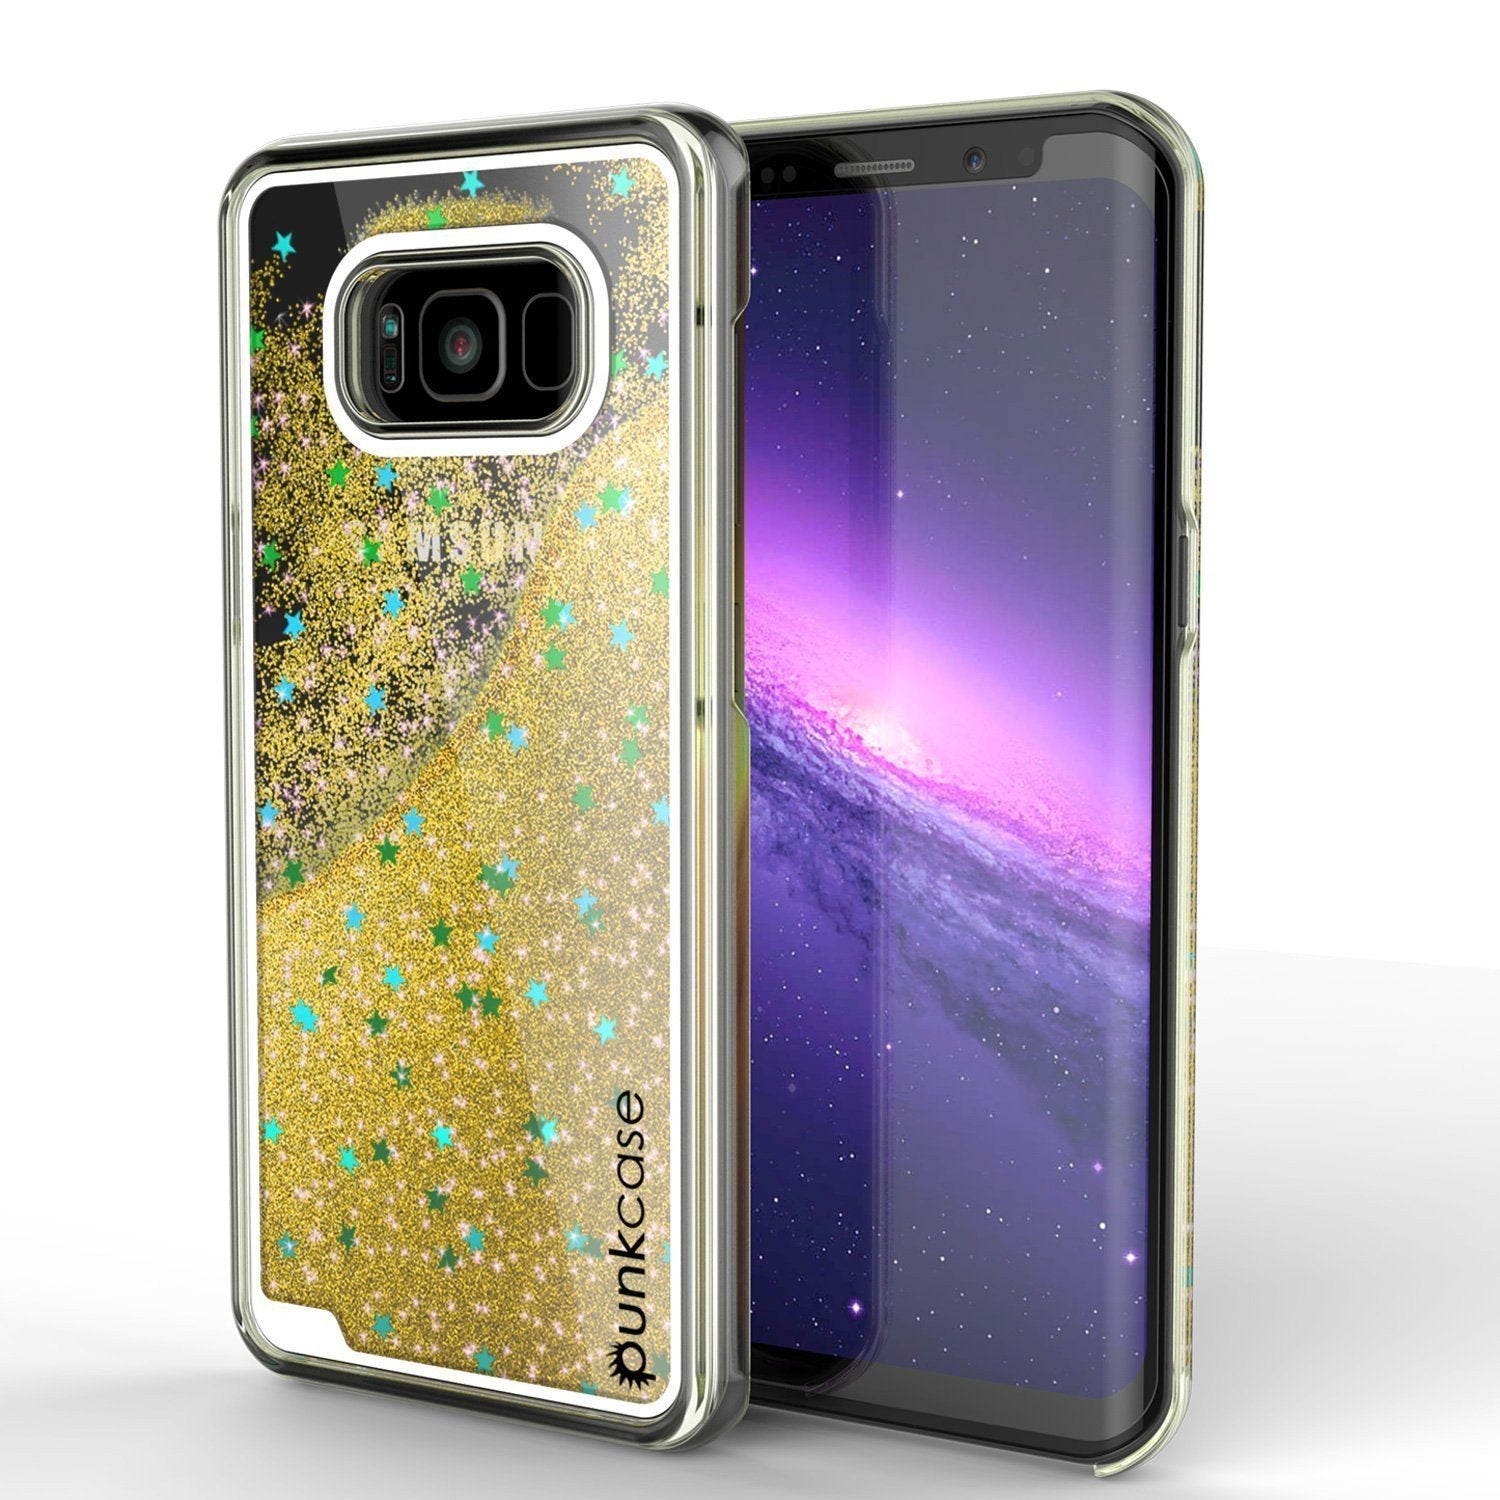 Galaxy S8 Case, Punkcase [Liquid Series] Protective Dual Layer Floating Glitter Cover with lots of Bling & Sparkle + PunkShield Screen Protector for Samsung S8 [Gold] - PunkCase NZ